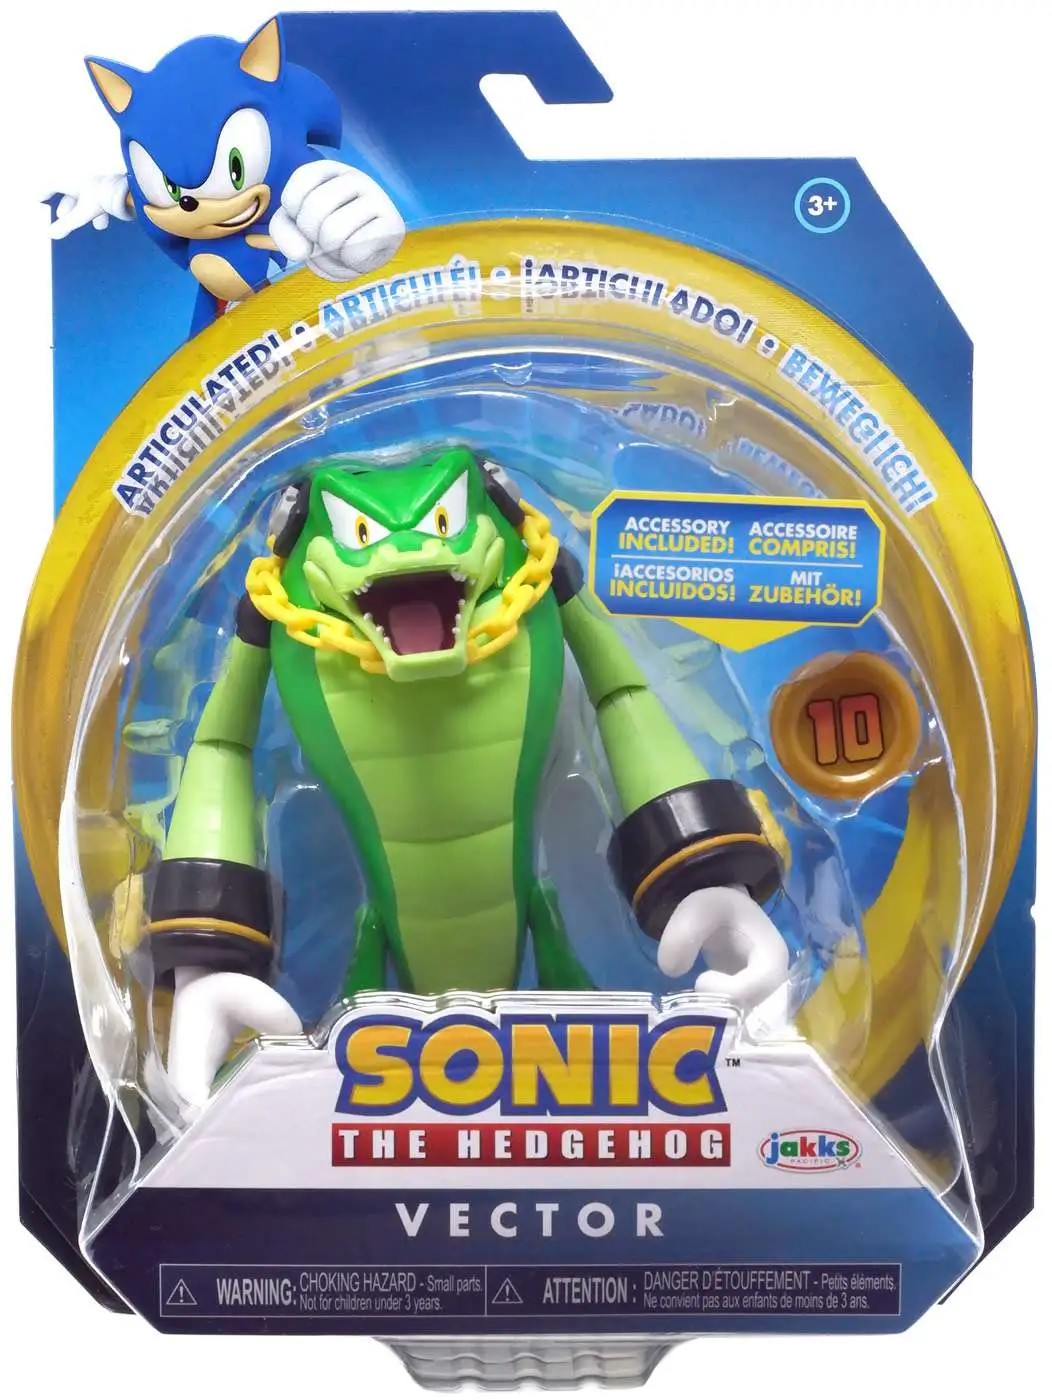 Sonic The Hedgehog Green Hill Zone Playset with 2.5 Sonic Action Figure  New